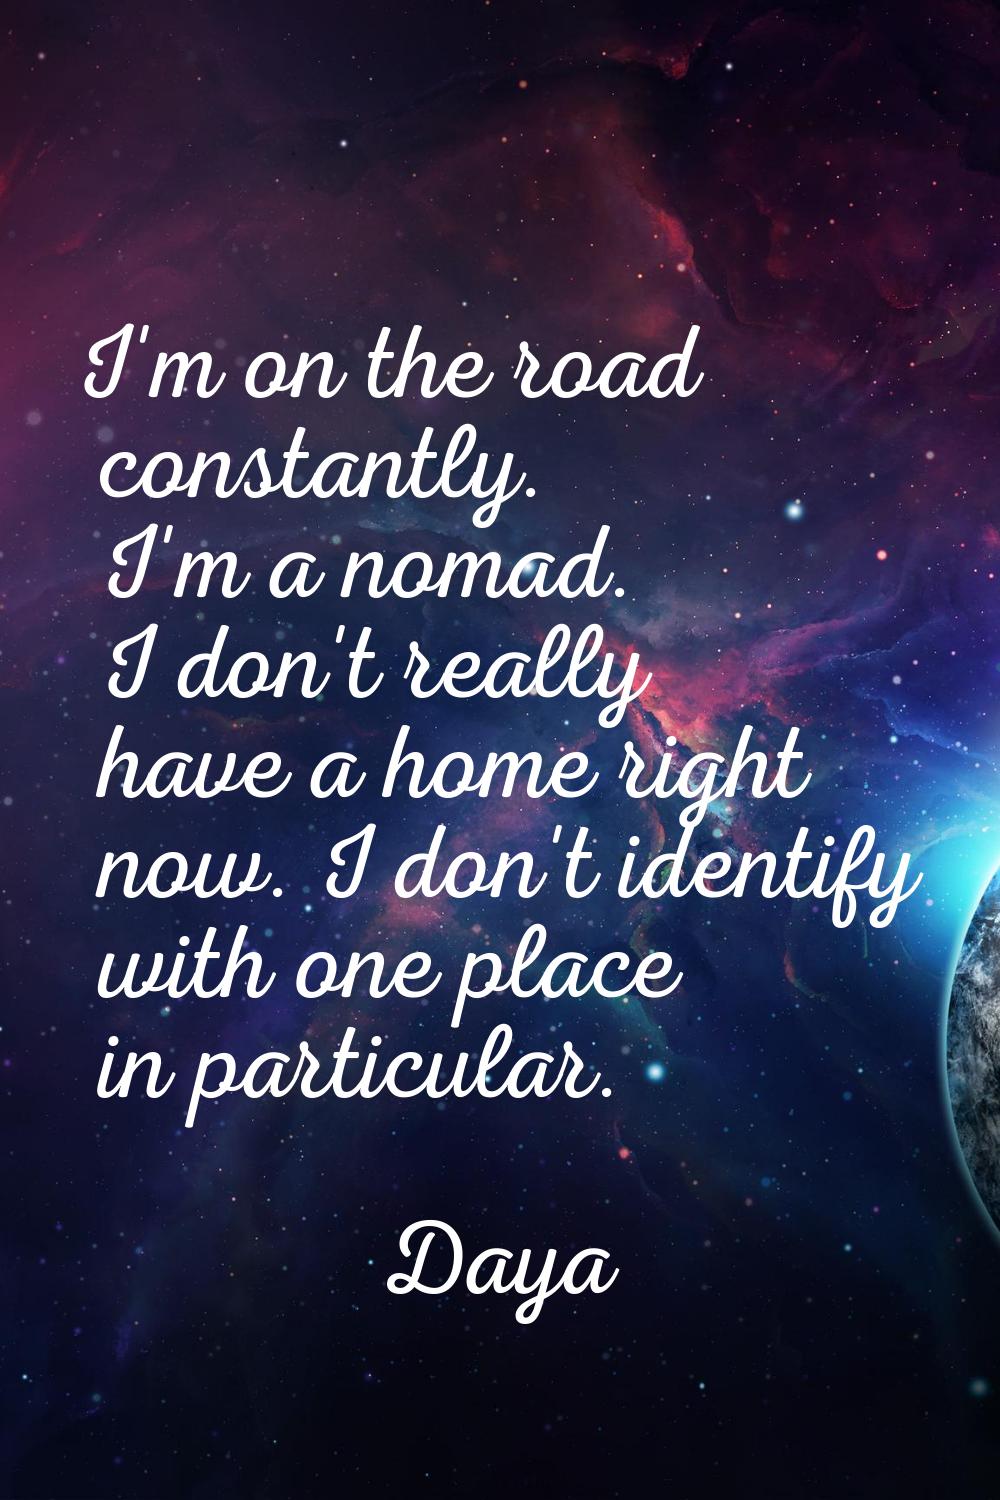 I'm on the road constantly. I'm a nomad. I don't really have a home right now. I don't identify wit